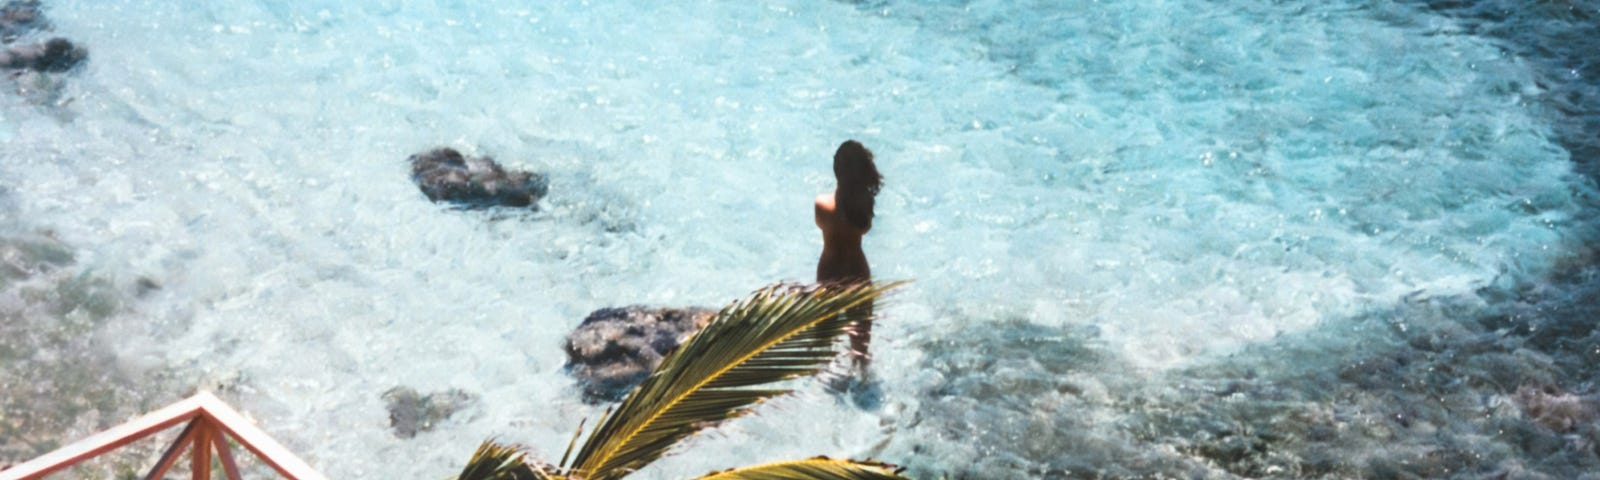 Baring it all, a female skinny-dipping in turquoise waters shaped into a heart. Women and body positive awareness.